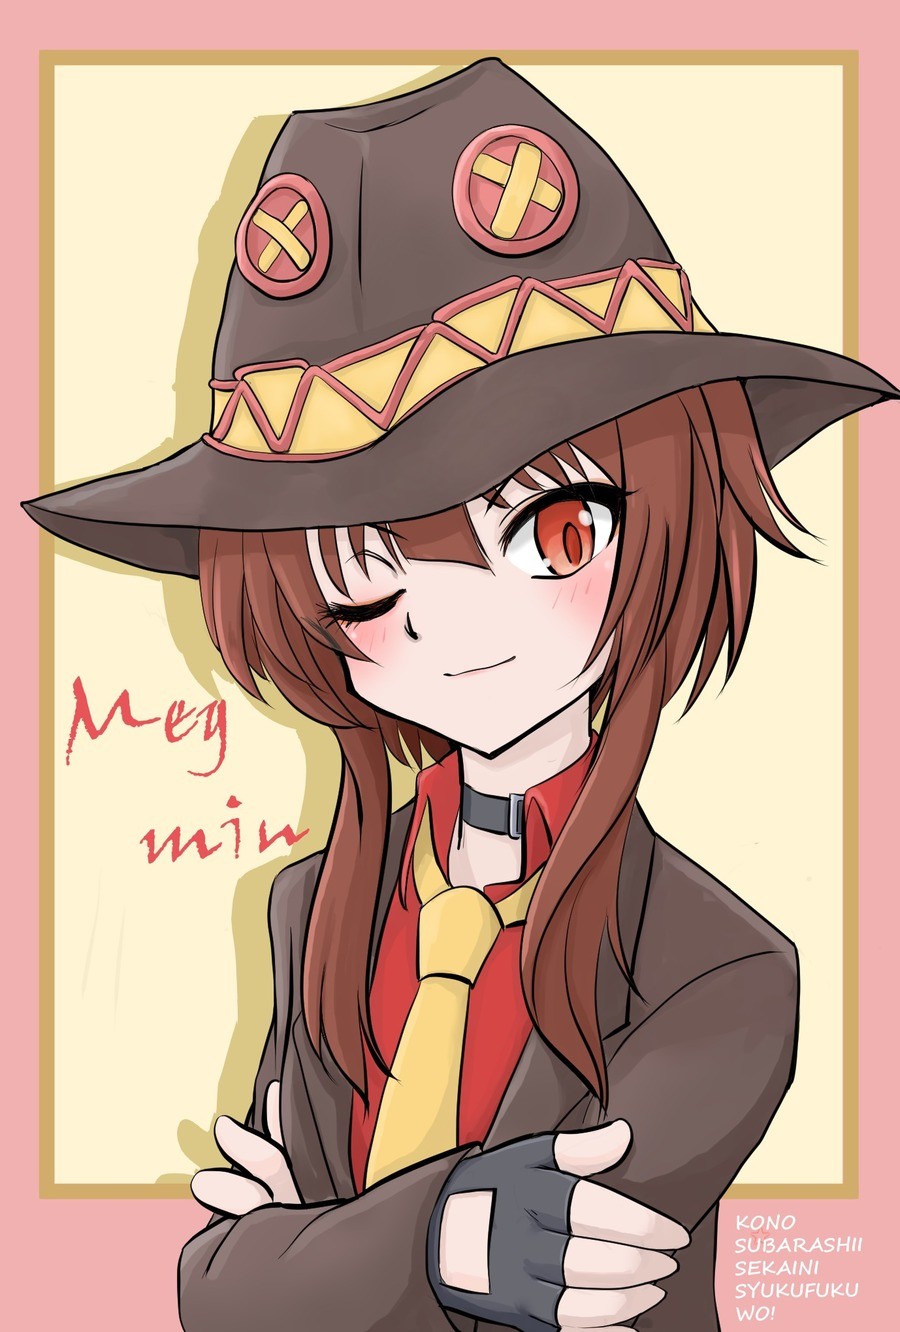 Daily Megu - 801: Atheist Megu. join list: DailySplosion (826 subs)Mention History Source: .. M'egumin.